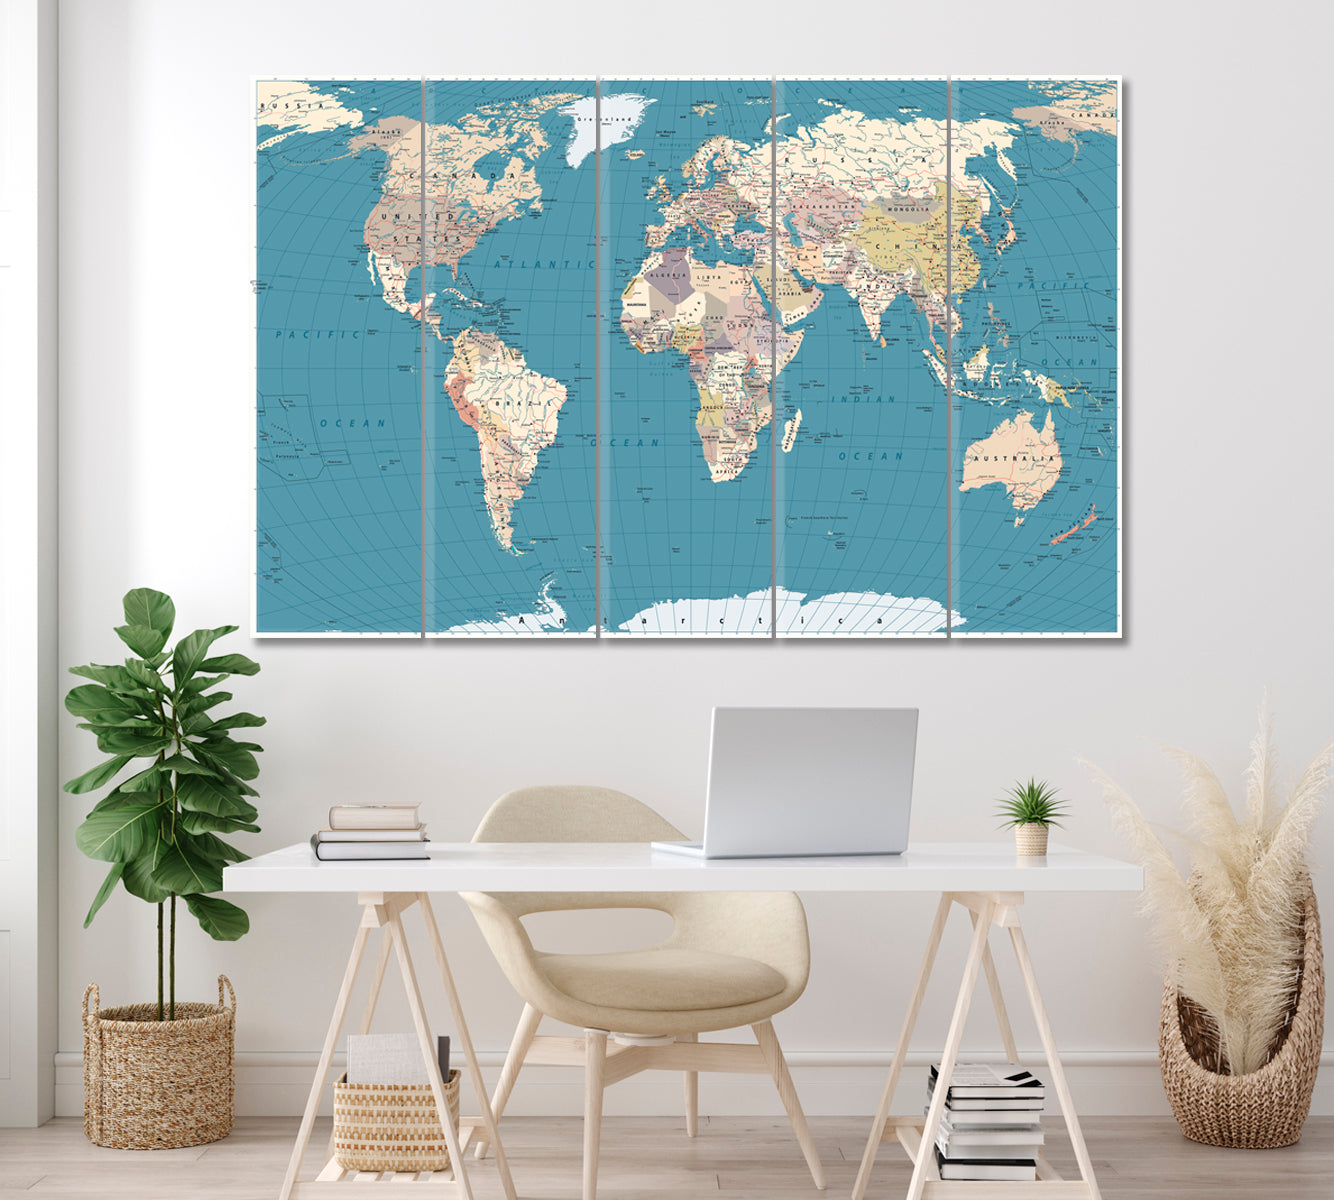 Detailed World Map Canvas Print ArtLexy 5 Panels 36"x24" inches 